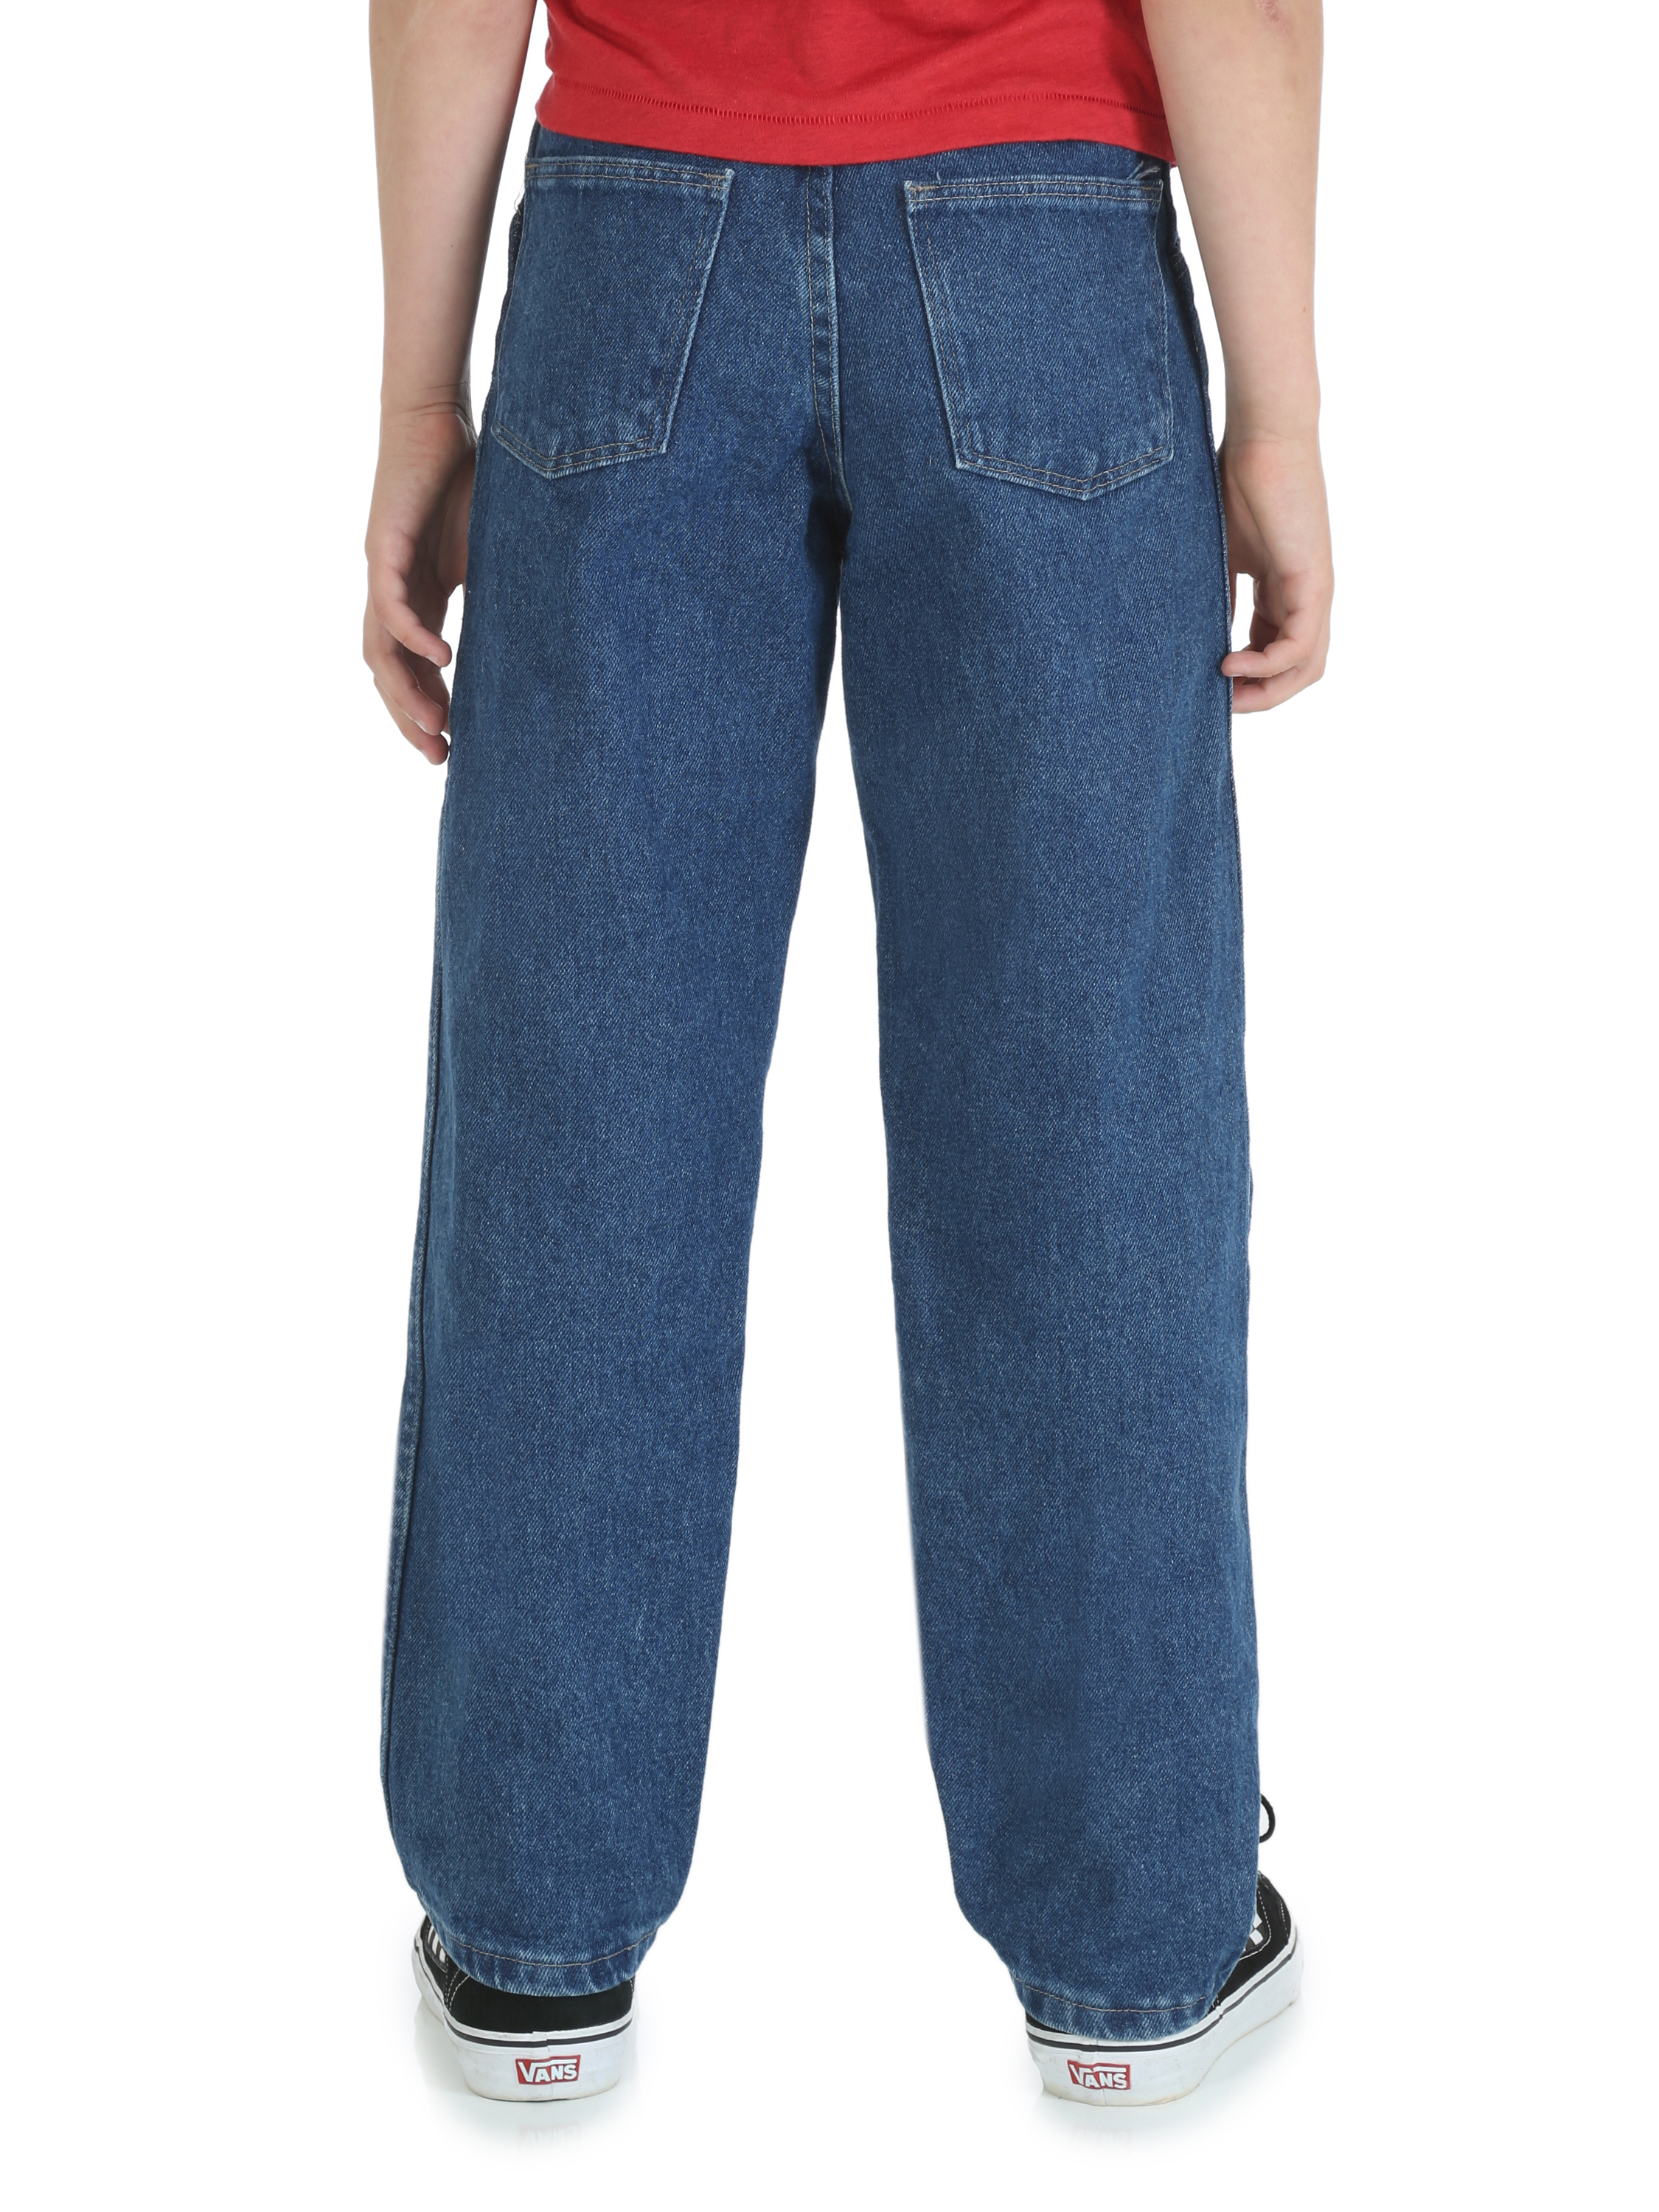 Rustler Boys Relaxed Fit Jeans, Sizes 4-16 & Husky - image 3 of 5